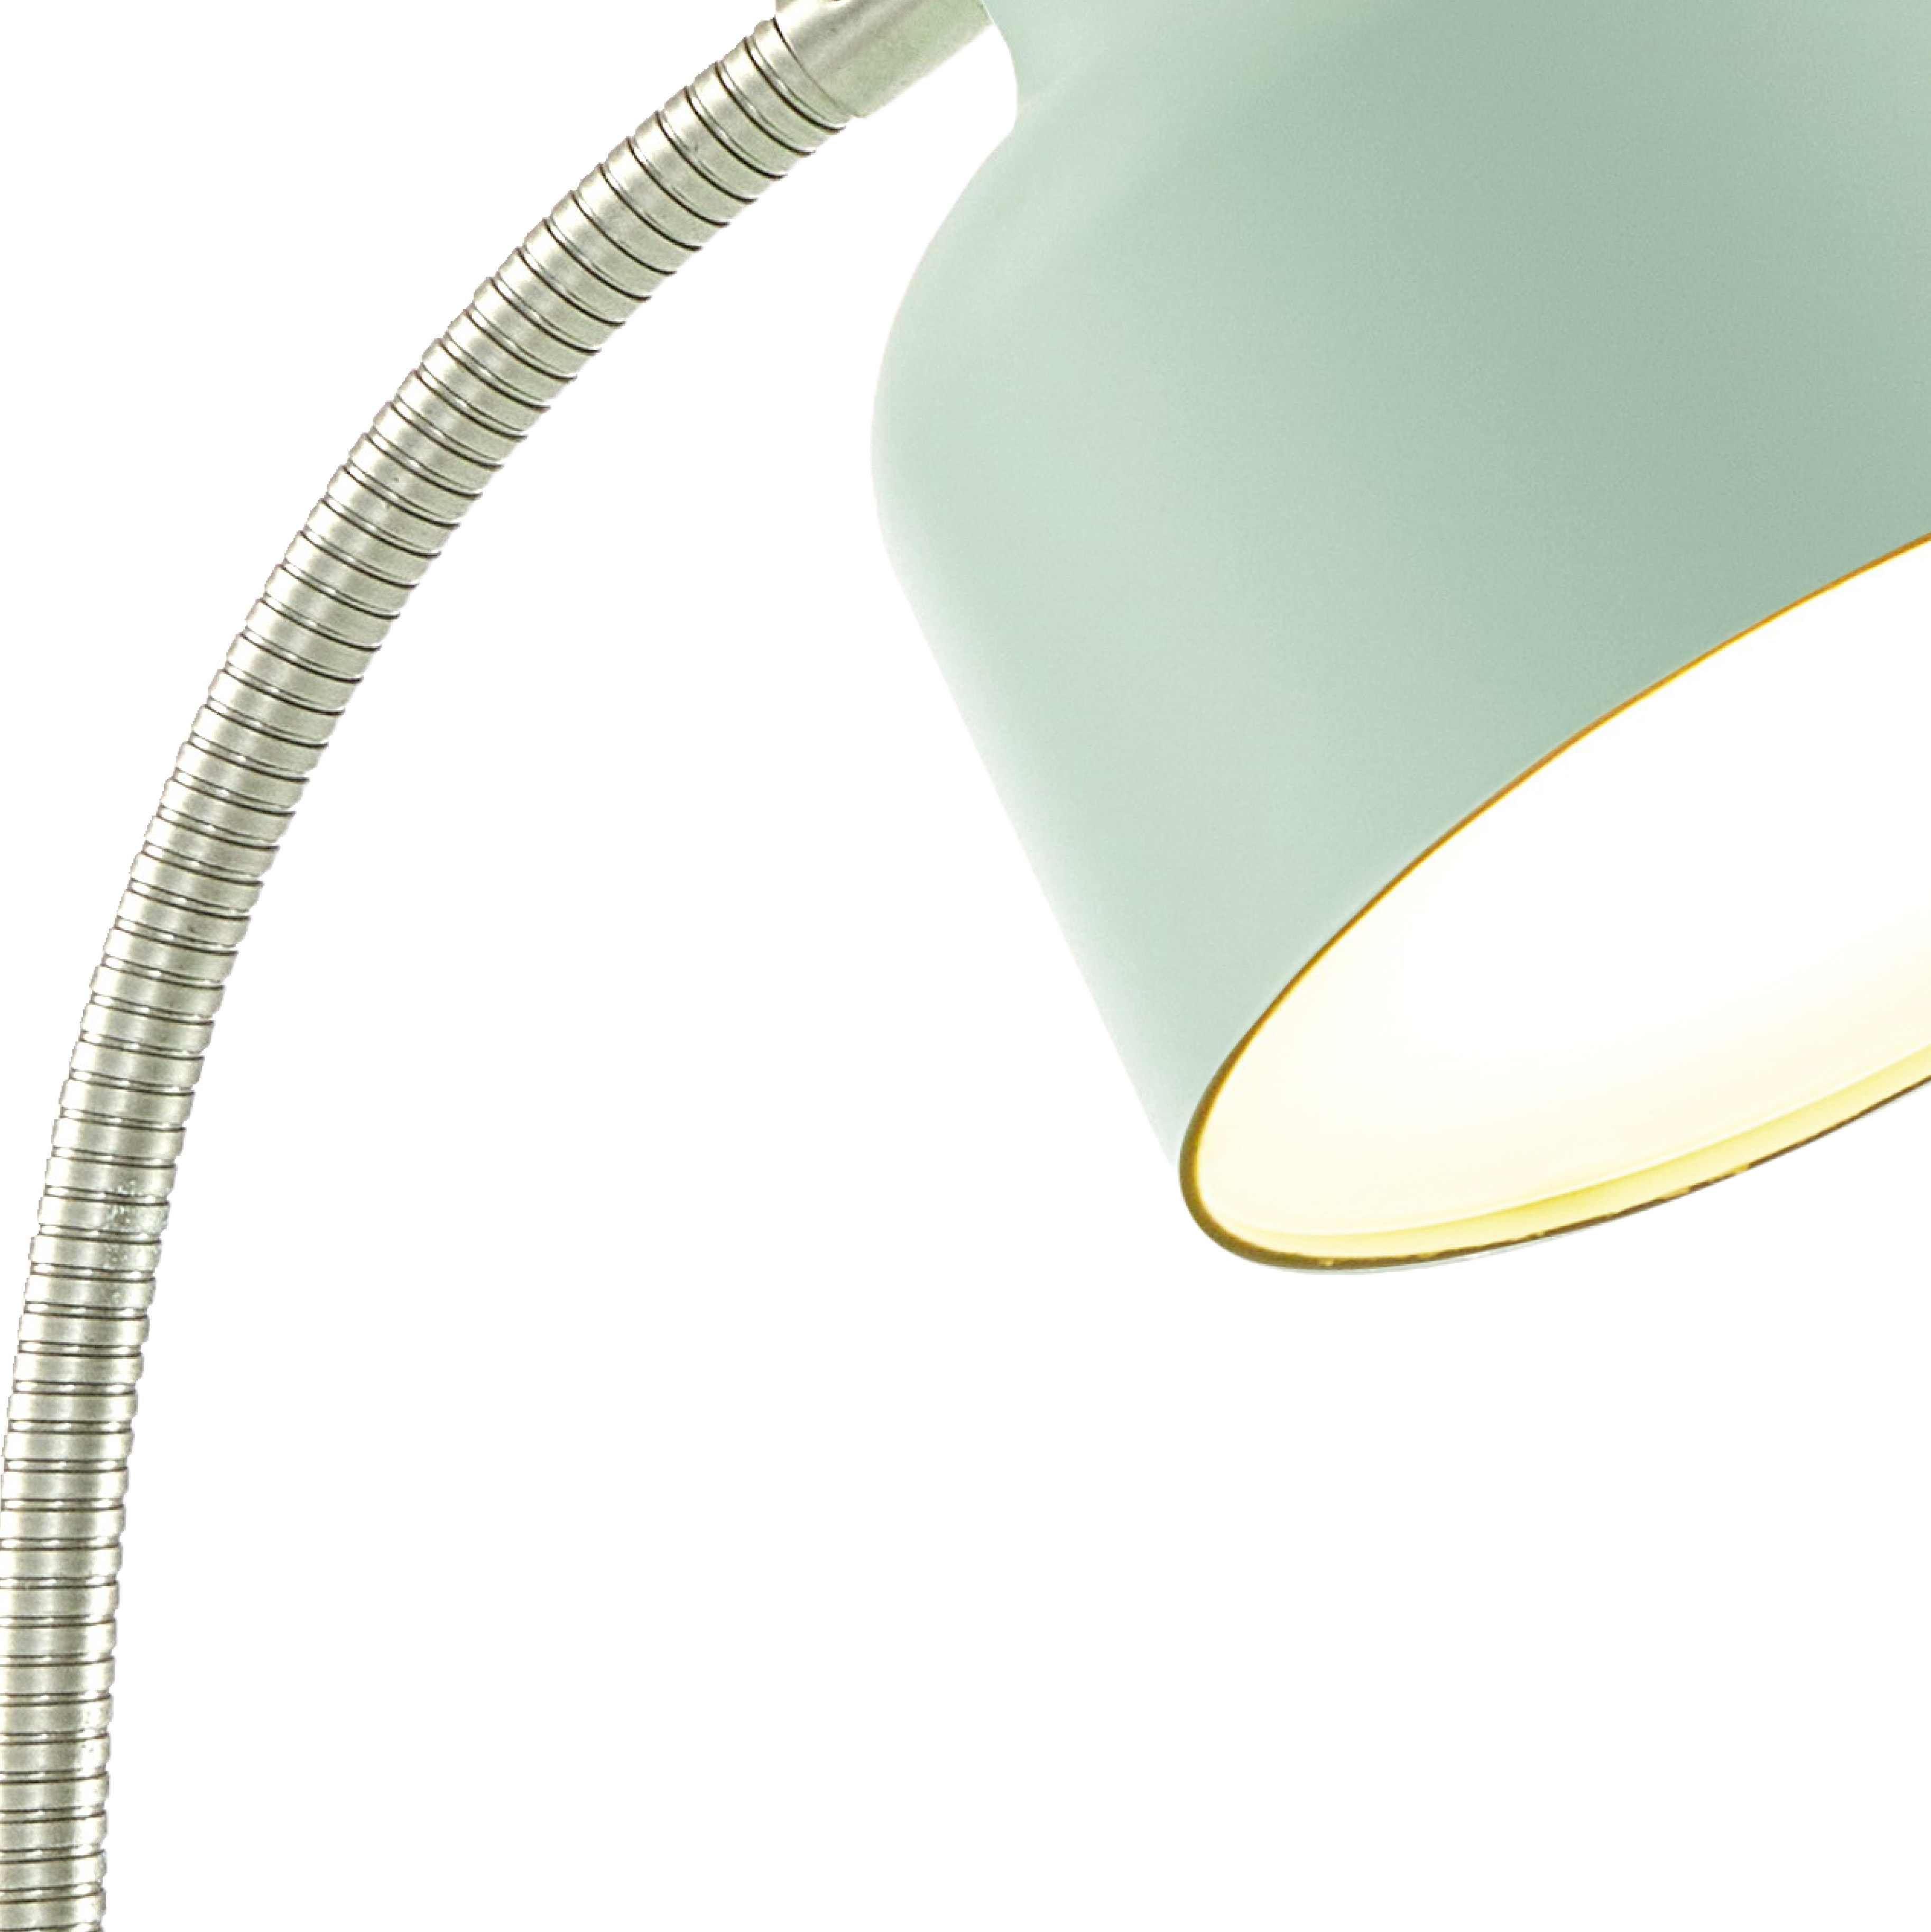 Mainstays LED Desk Lamp with Catch-All Base & AC Outlet, Matte Mint Green - image 4 of 11